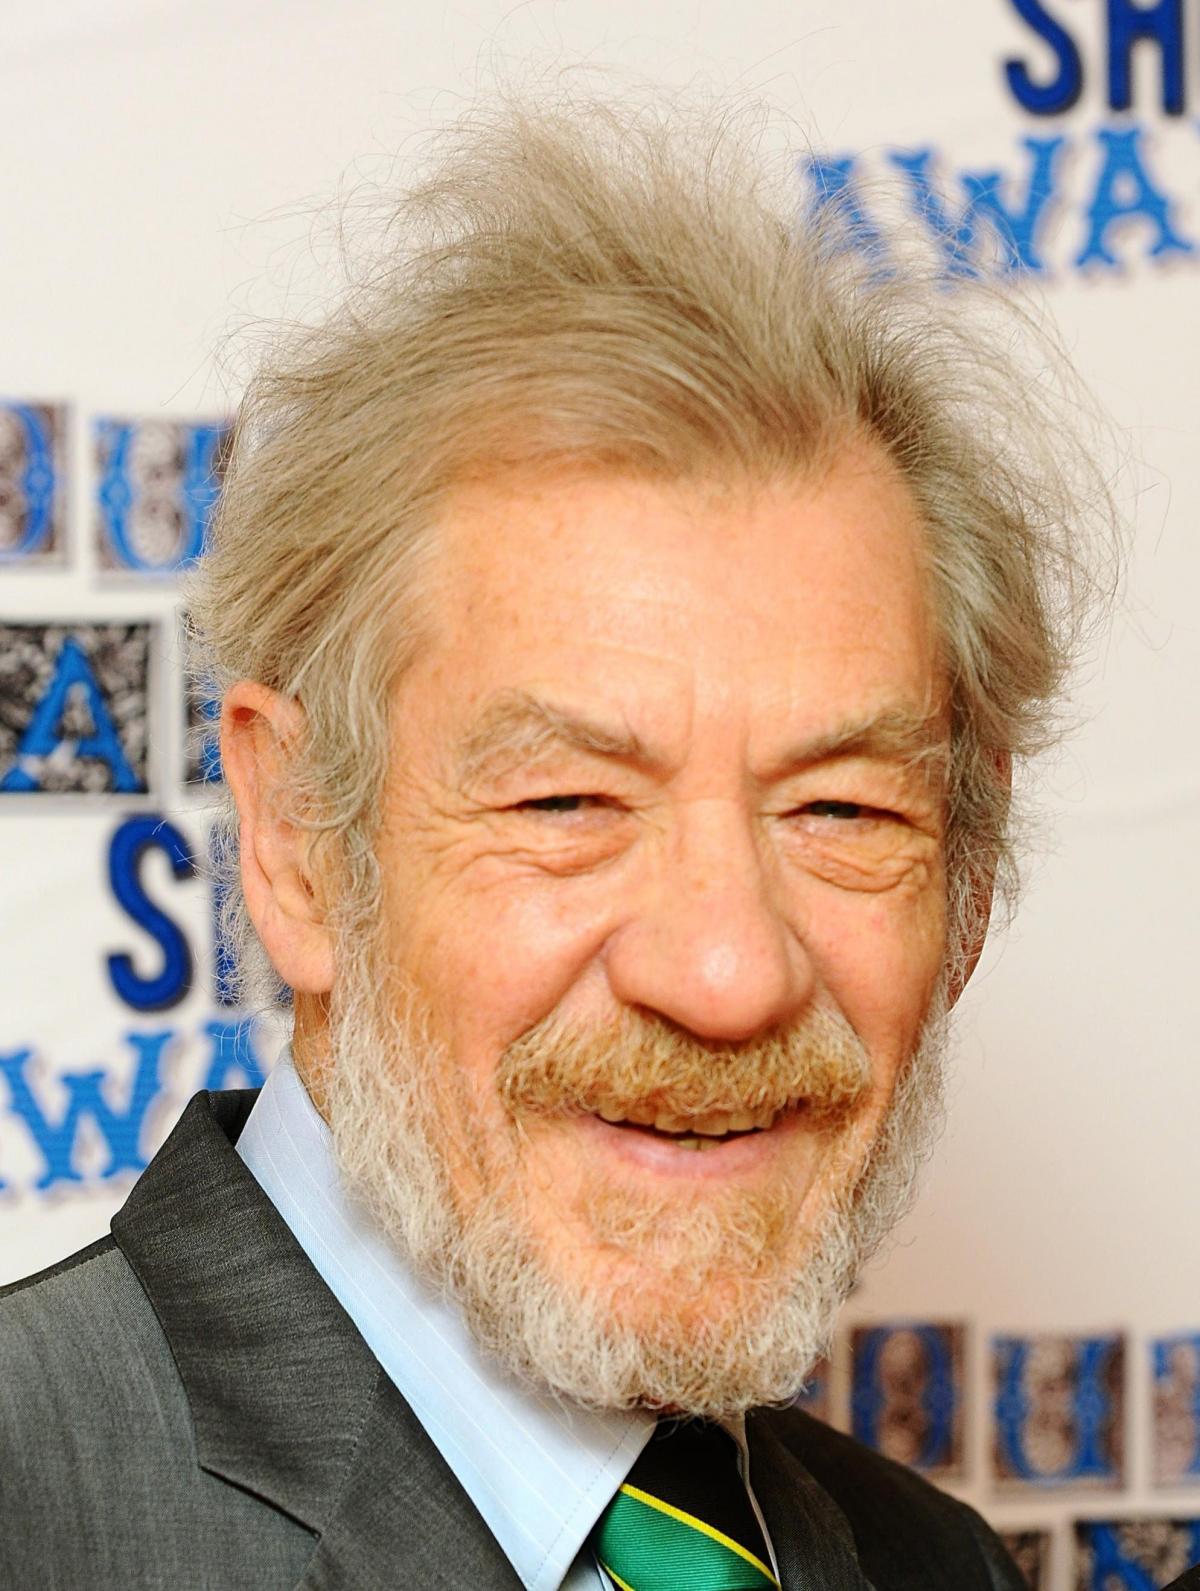 Actor Sir Ian McKellen, with a message saying 'Greetings from Middle Earth', said: "All we have to do is decide what to do with the time that is given to us."